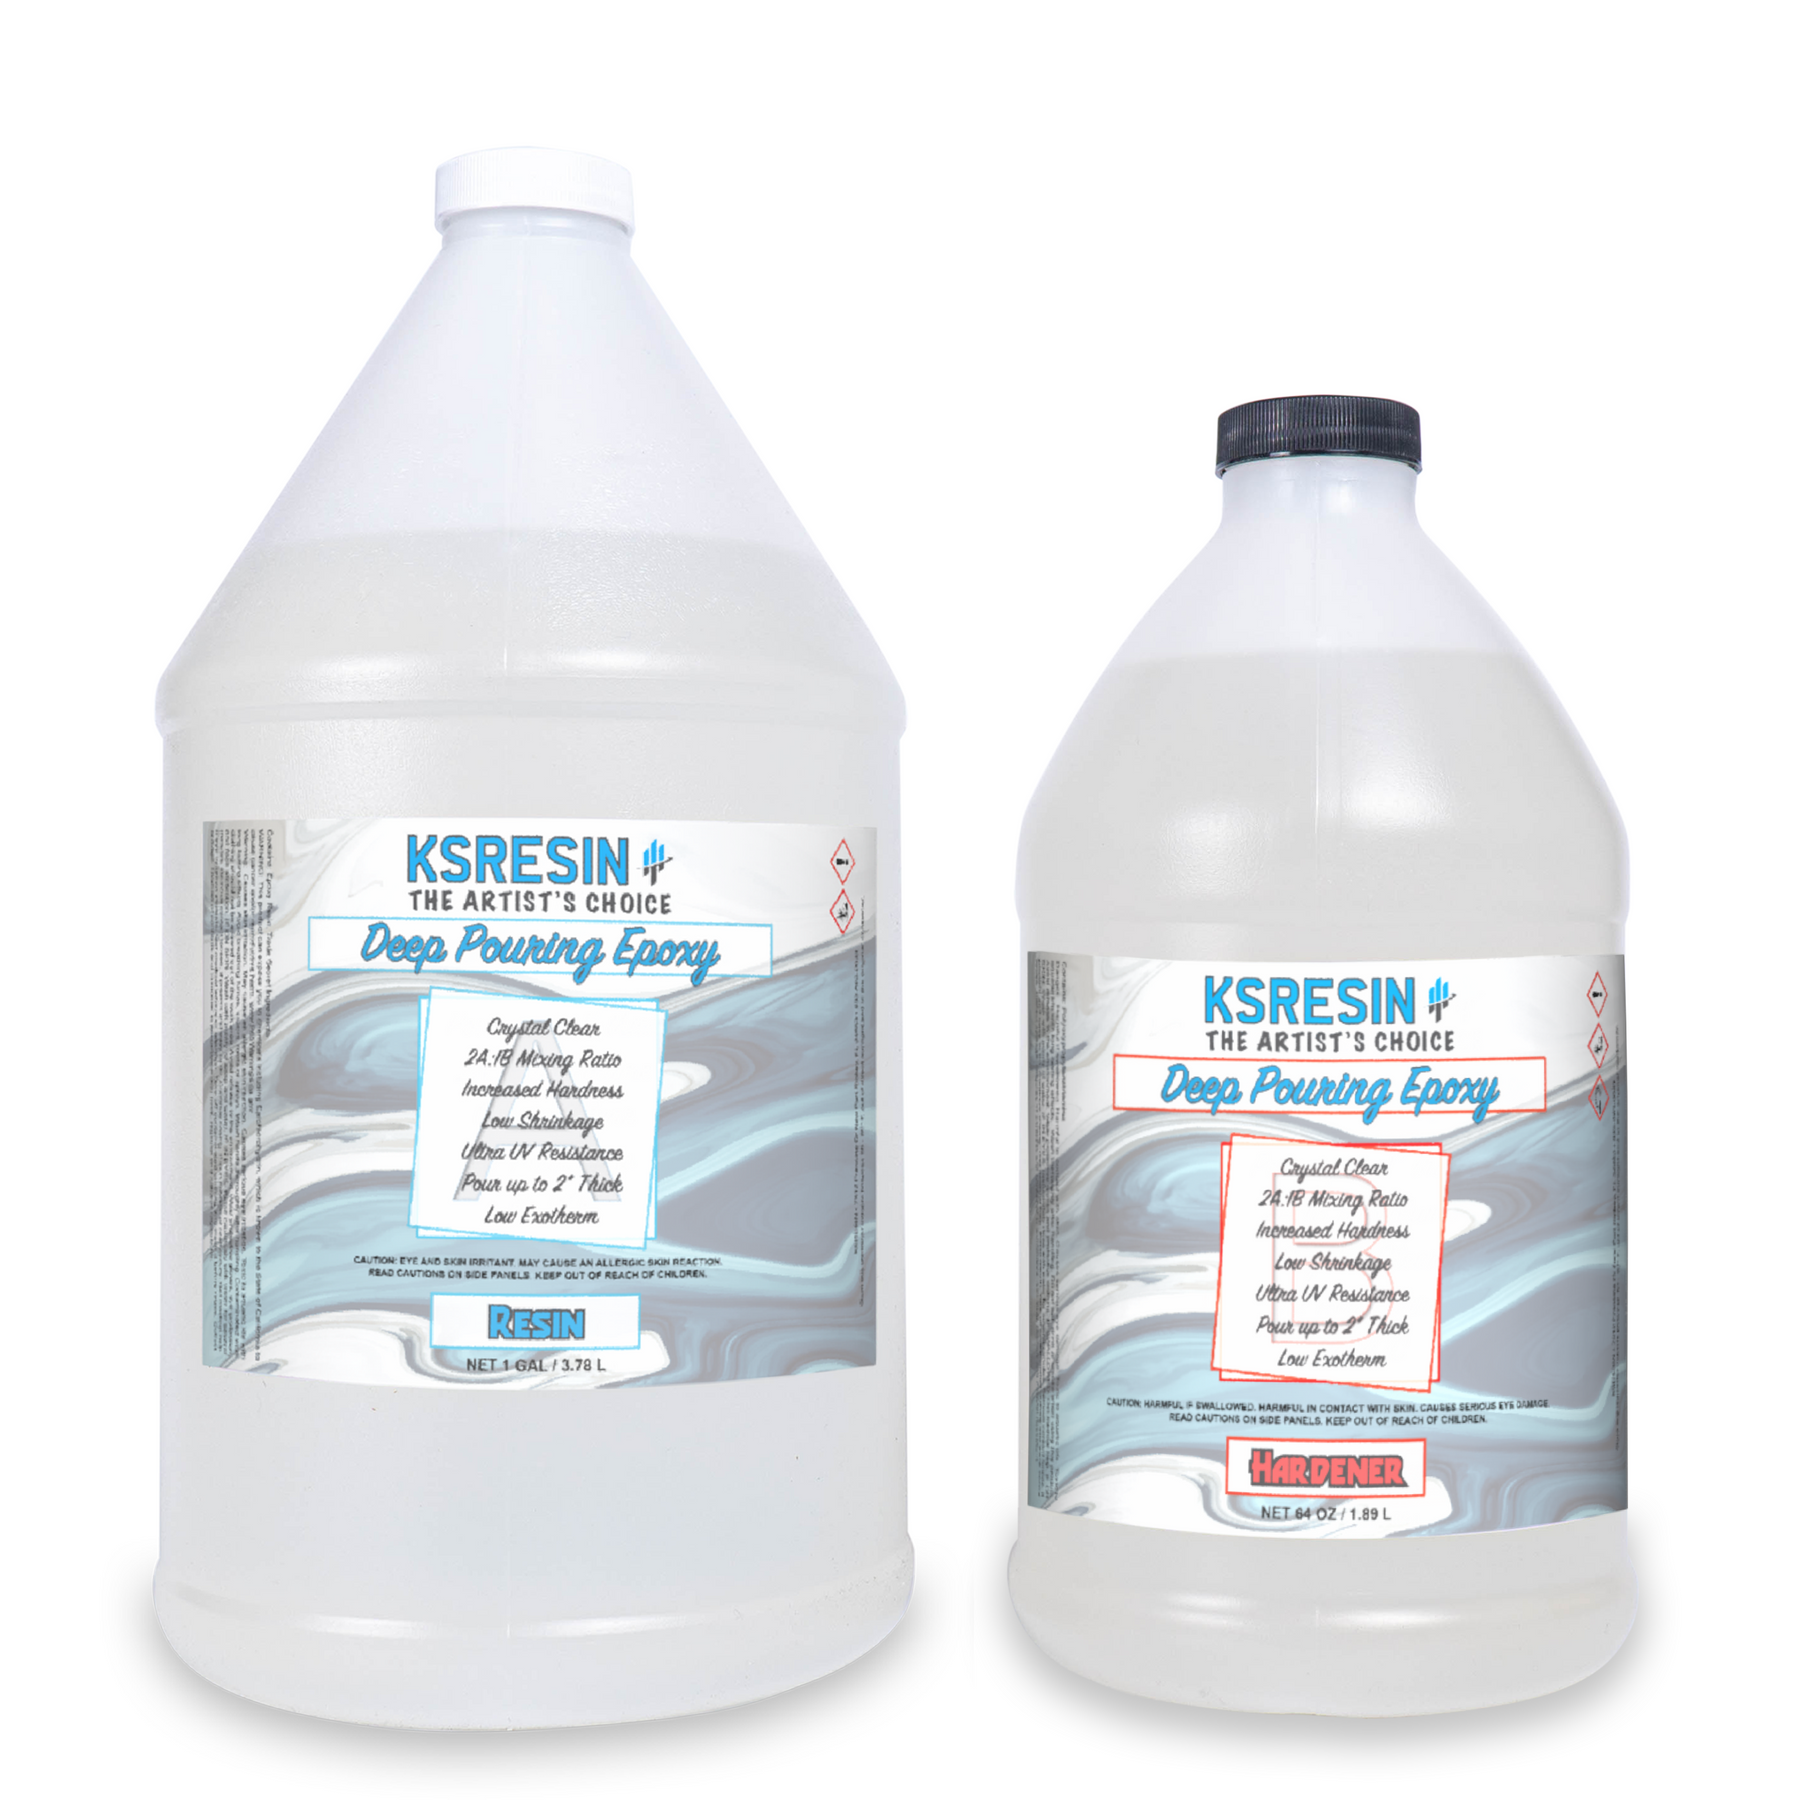 UltraClear Deep Pour Epoxy 6 Gallons